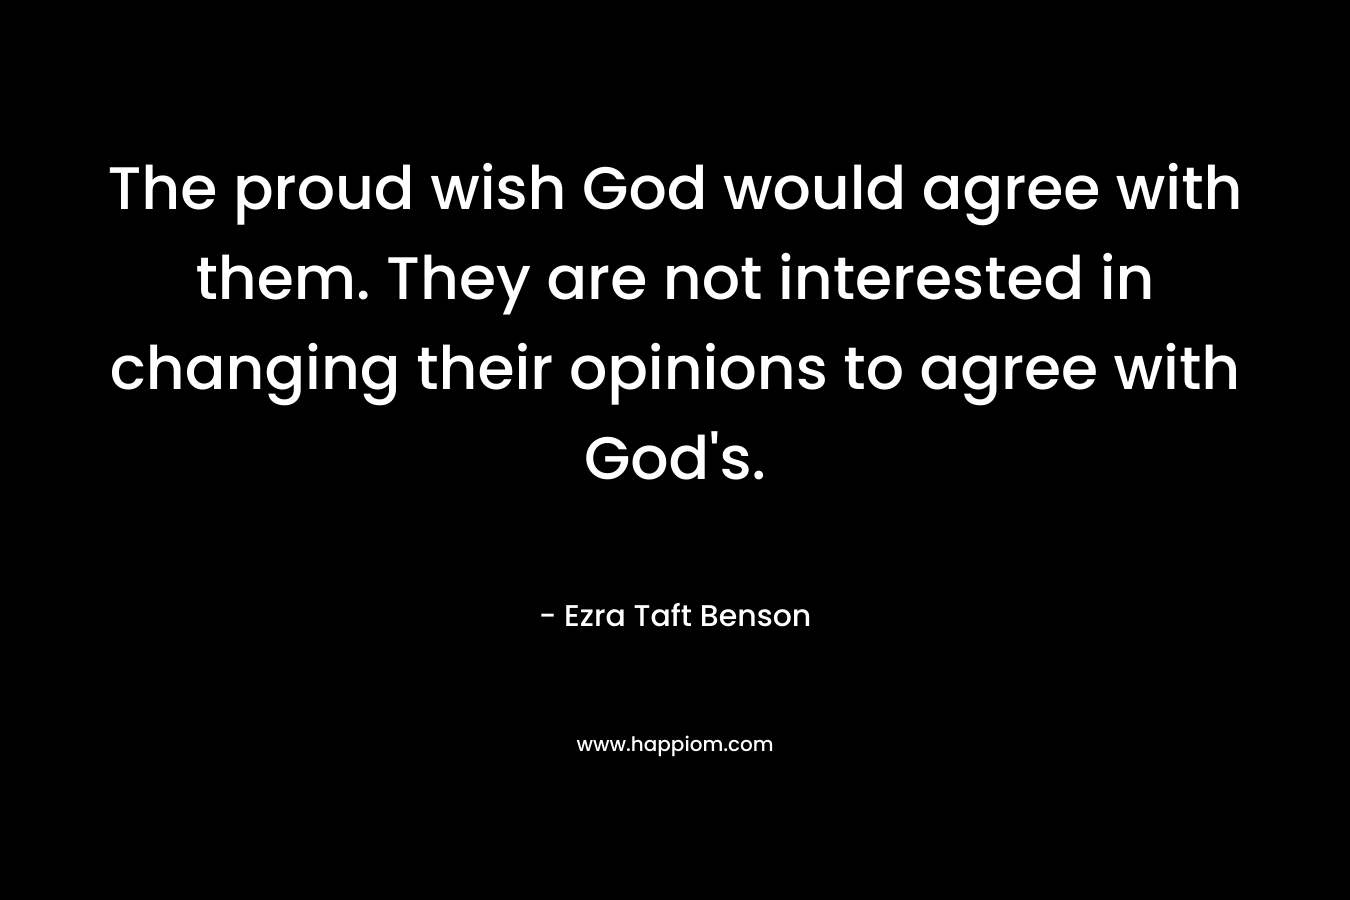 The proud wish God would agree with them. They are not interested in changing their opinions to agree with God's.